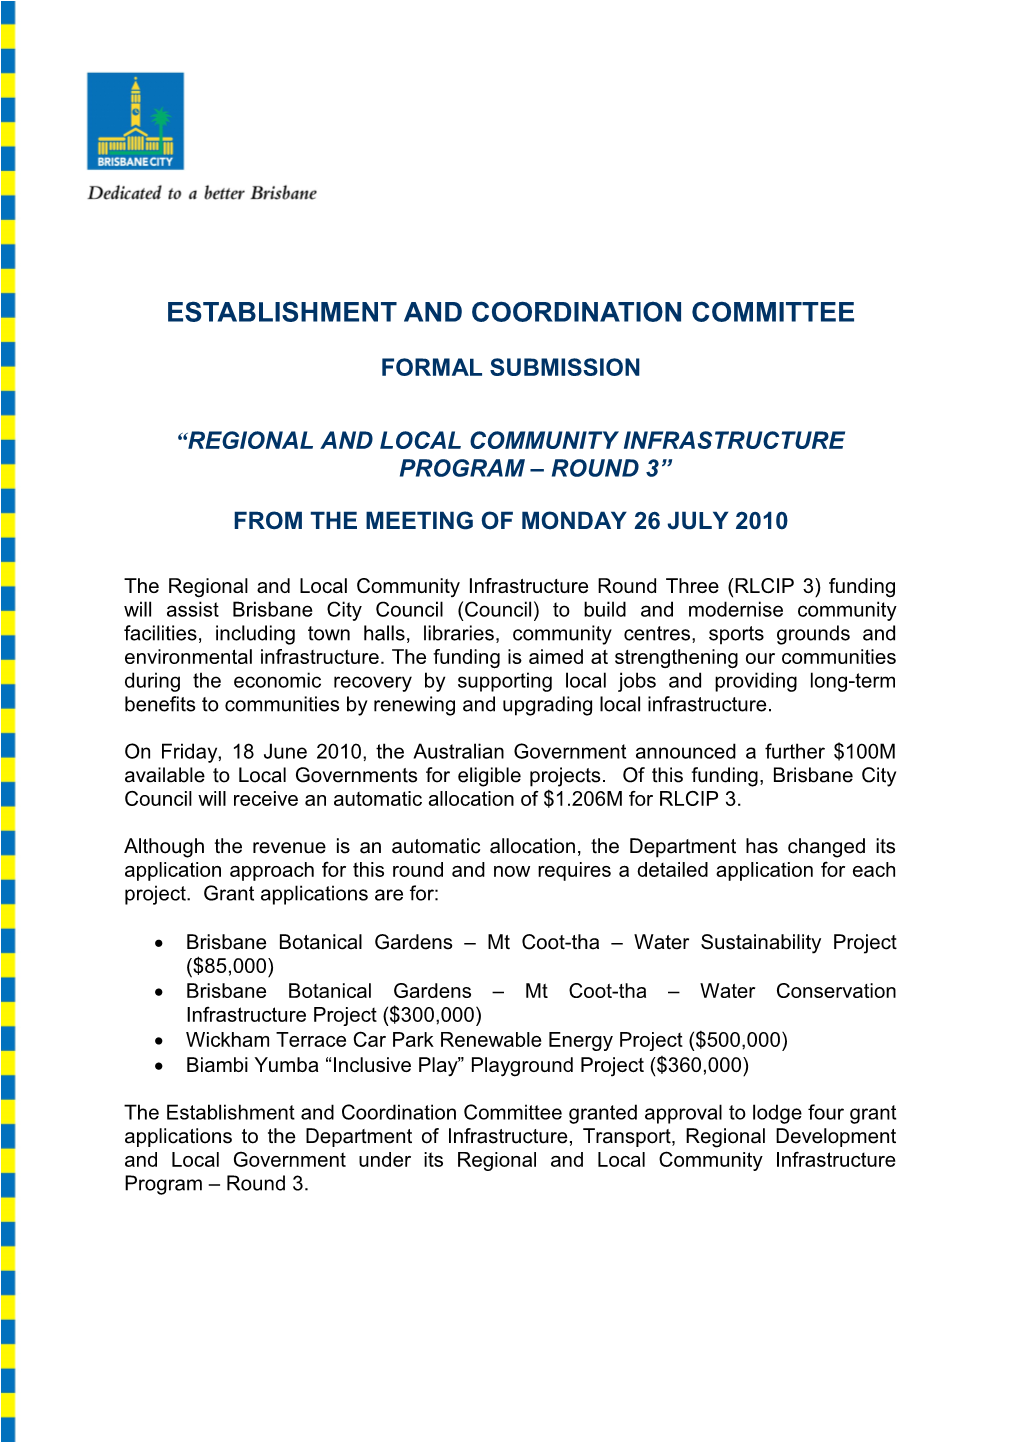 Establishment and Coordination Committee